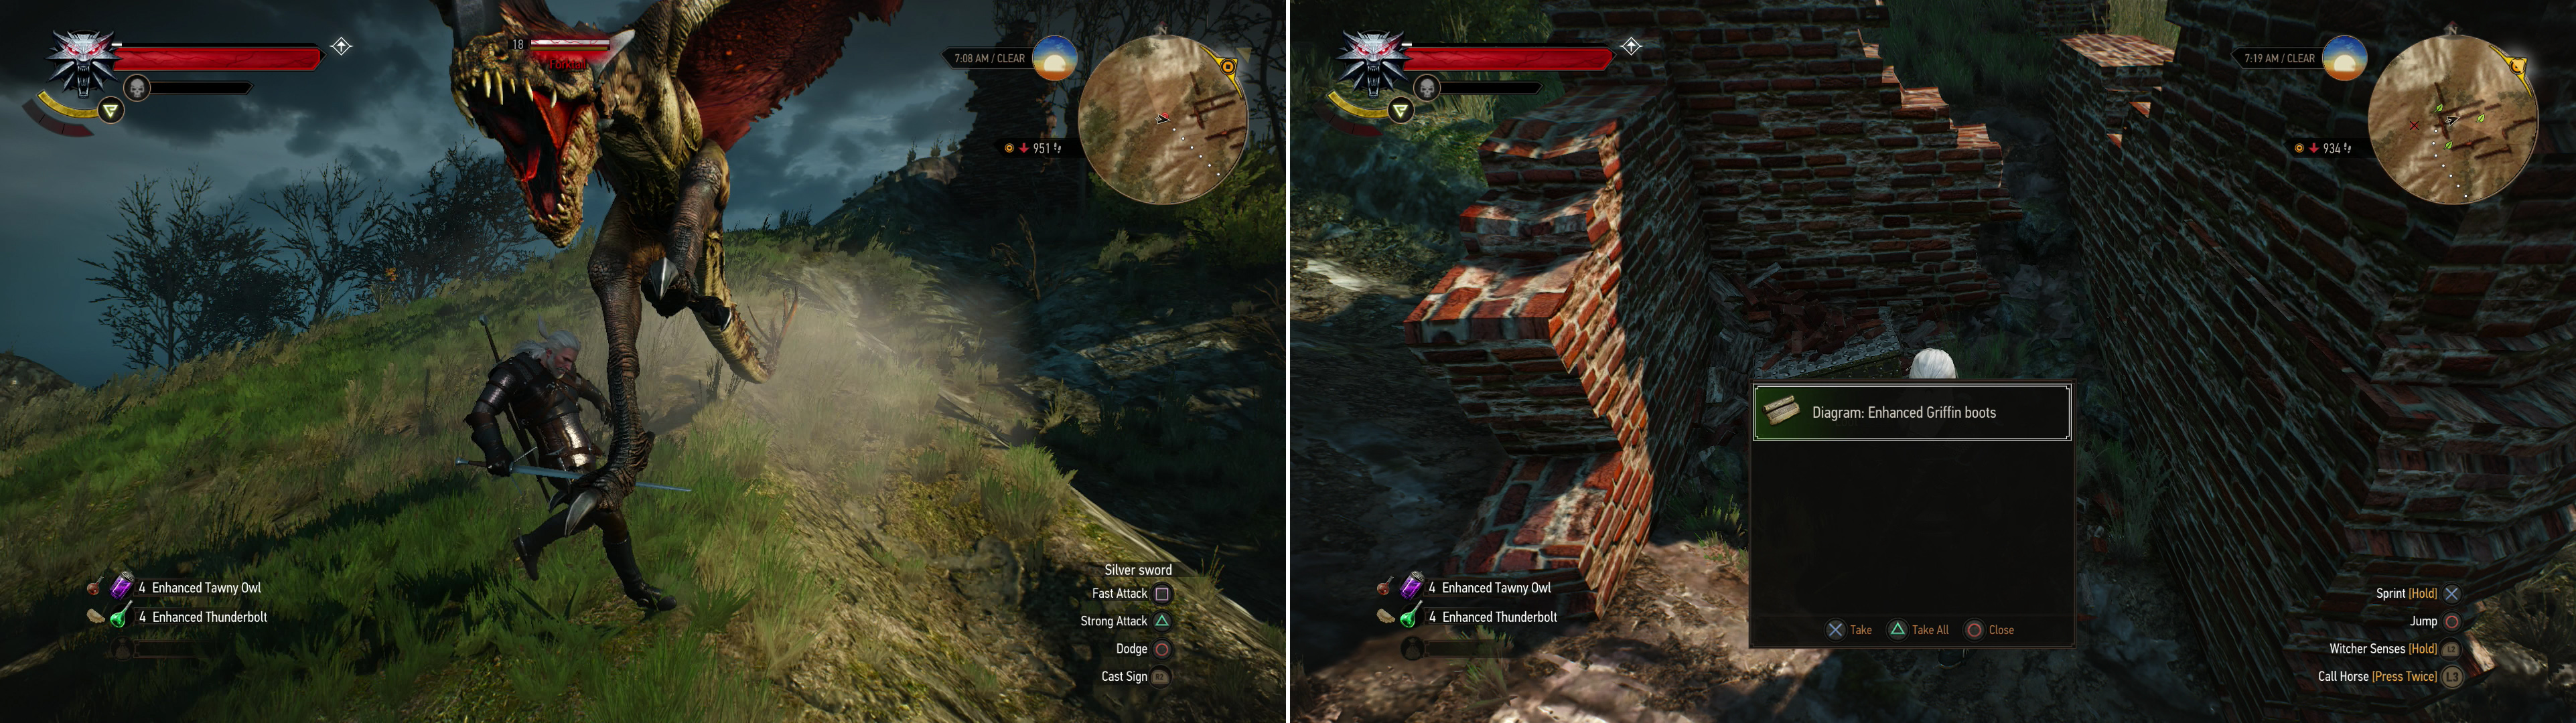 Avoid the Forktail's fangs and talons (left) then loot the ruins it guarded to obtain the Diagram: Enhanced Griffin Boot (right).